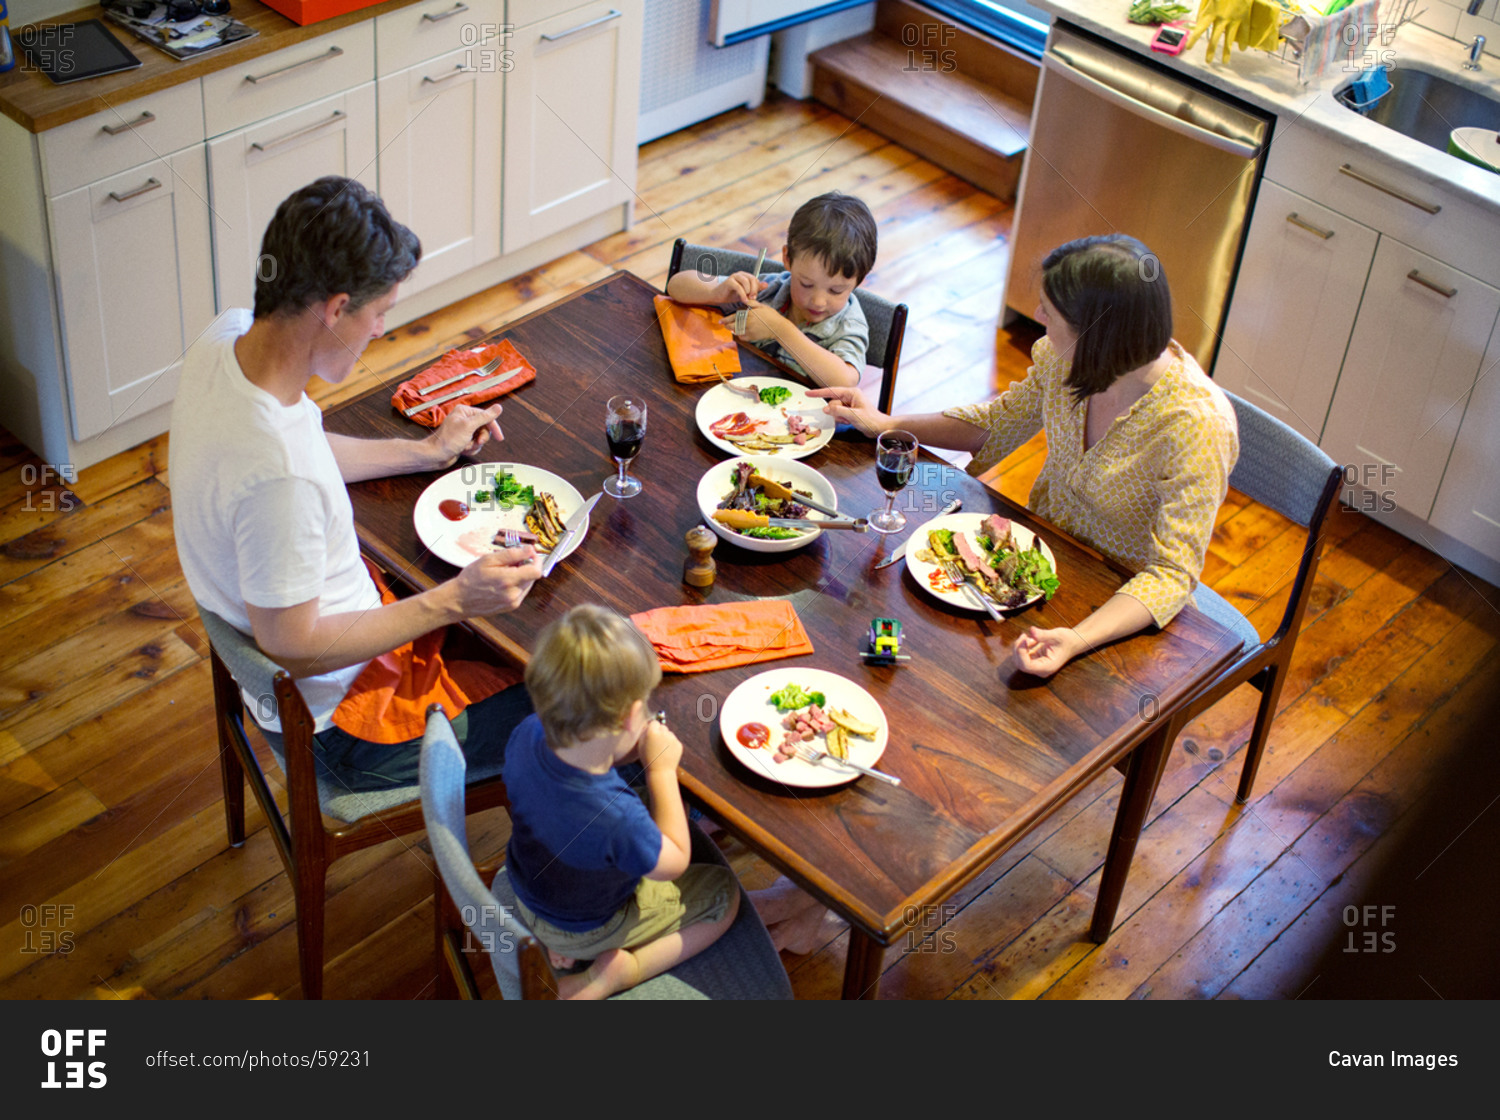 Overhead view of family eating dinner in kitchen